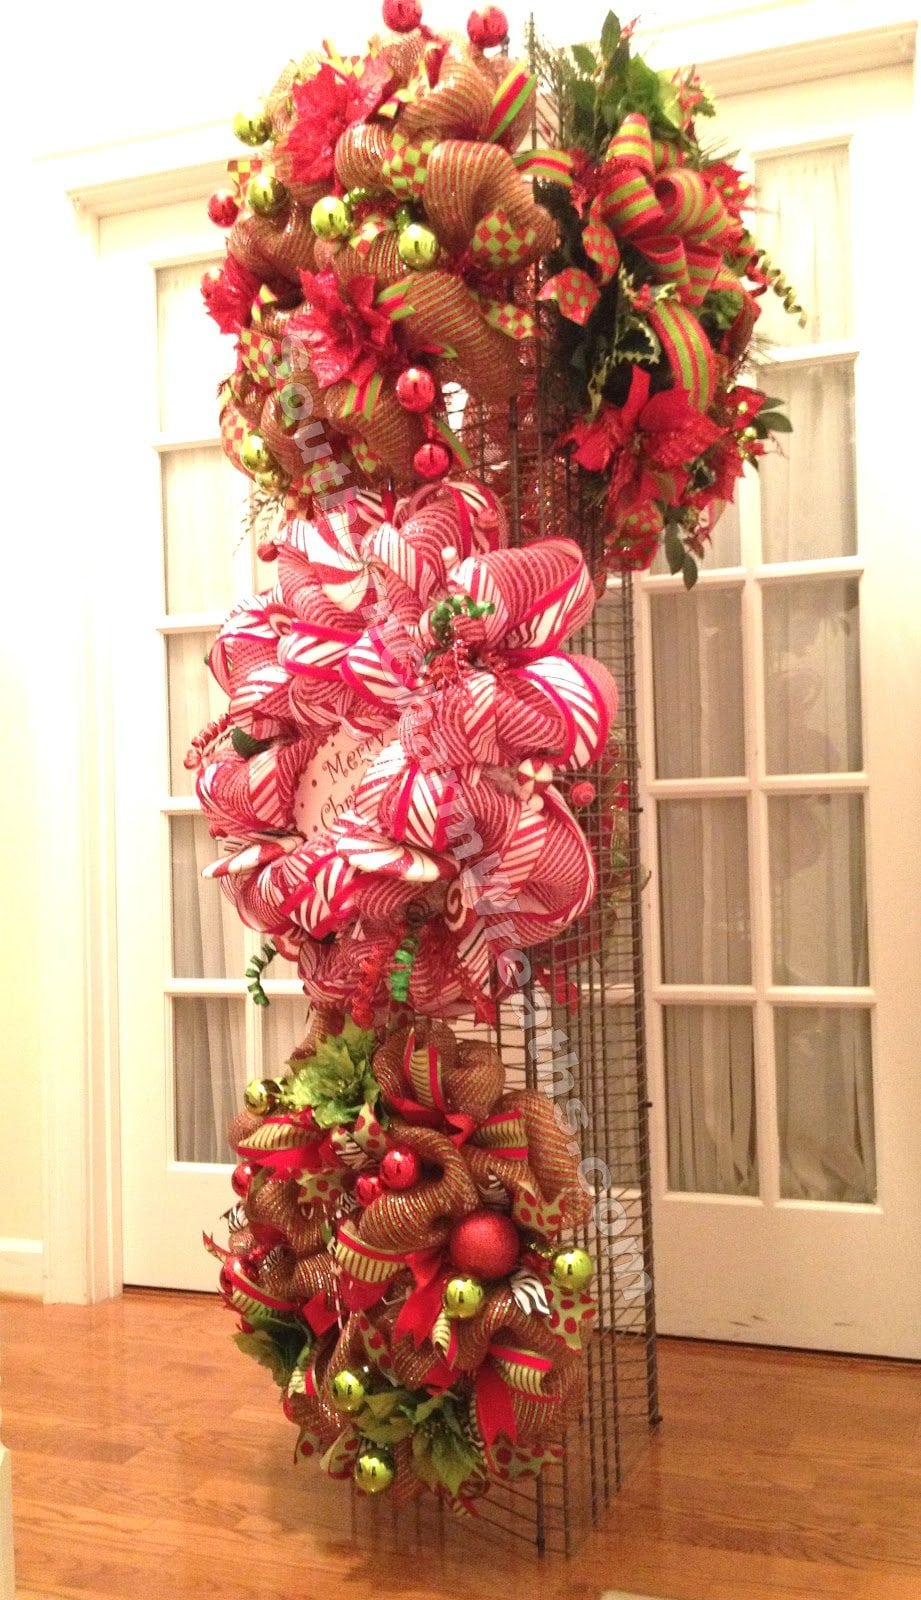 How to Make a Wreath Display for Craft Fair or Storage